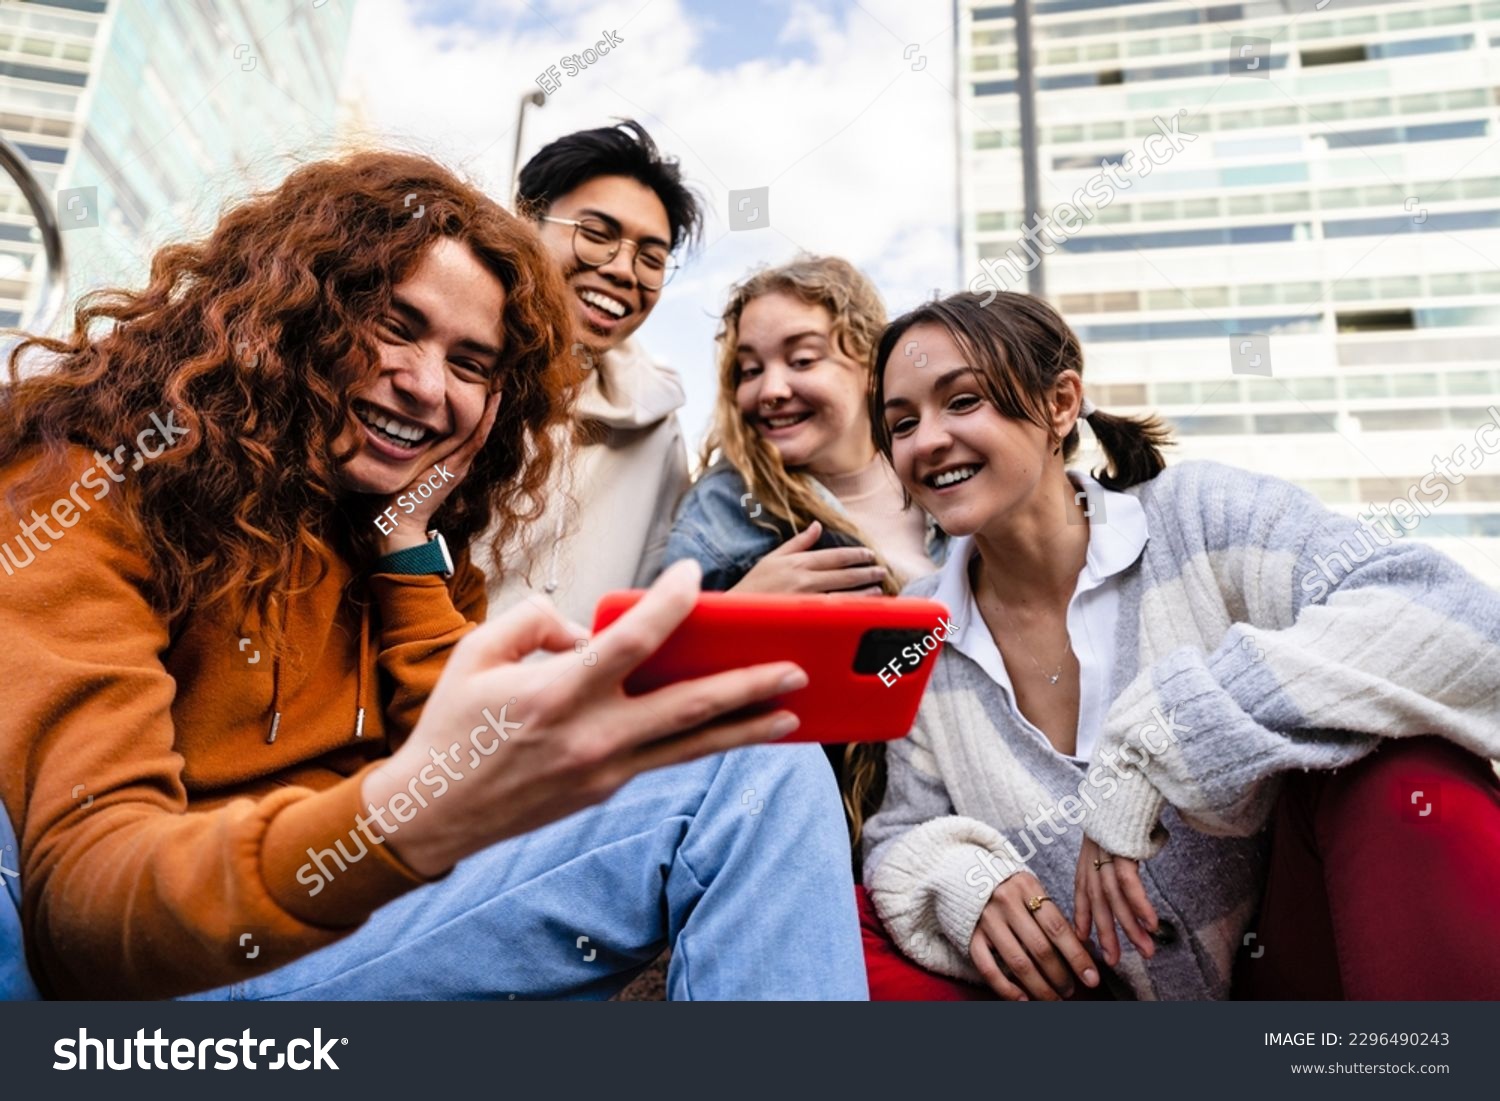 Group of young gen z friends sitting together in the city using cell phone app to share funny content #2296490243